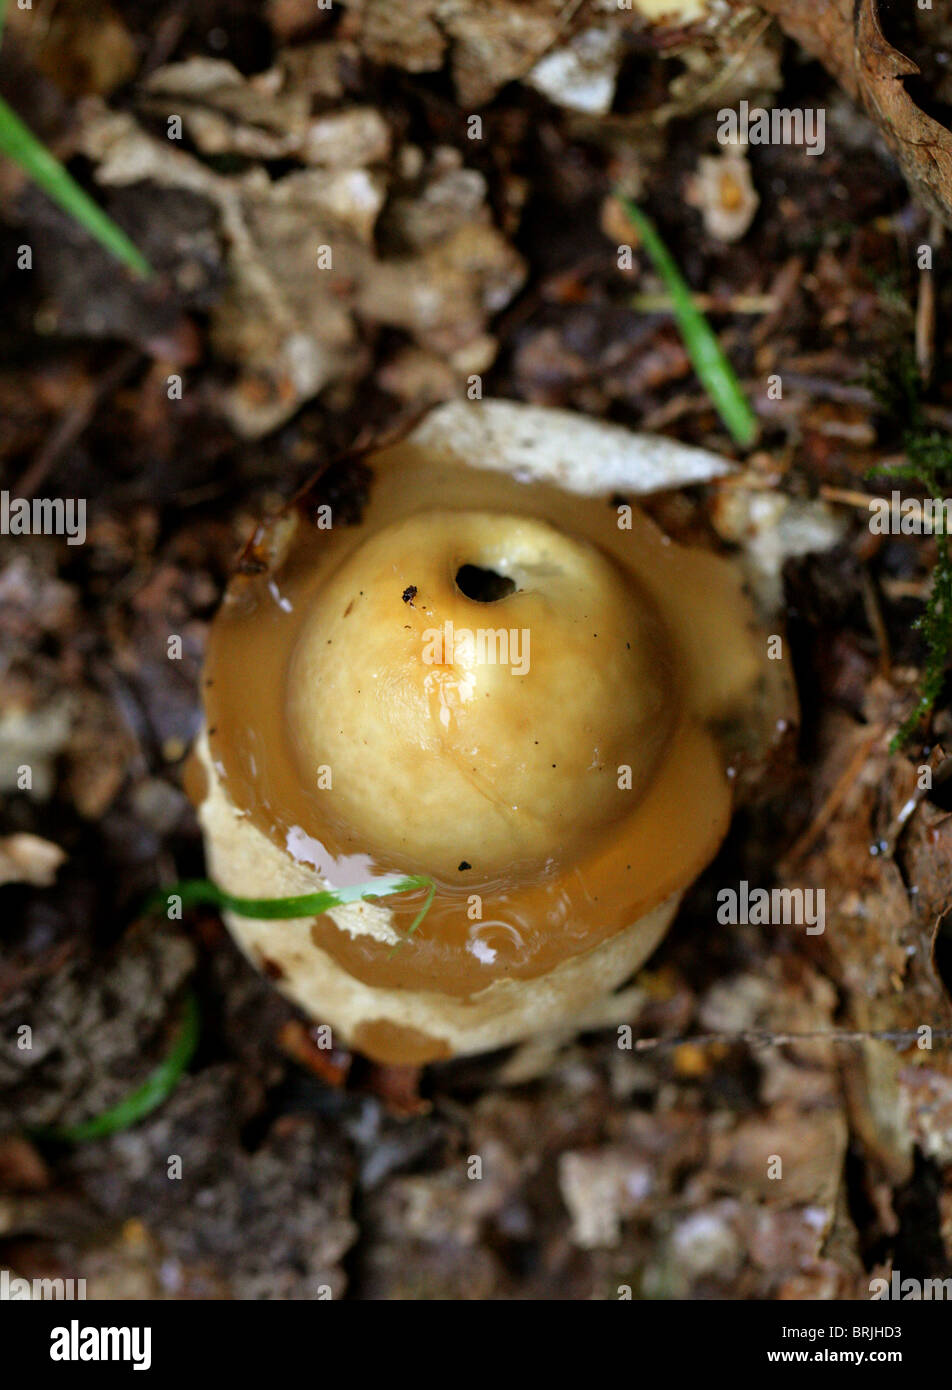 Young Stinkhorn Fungus or "Witches Eggs", Phallus impudicus, Phallaceae. Stock Photo